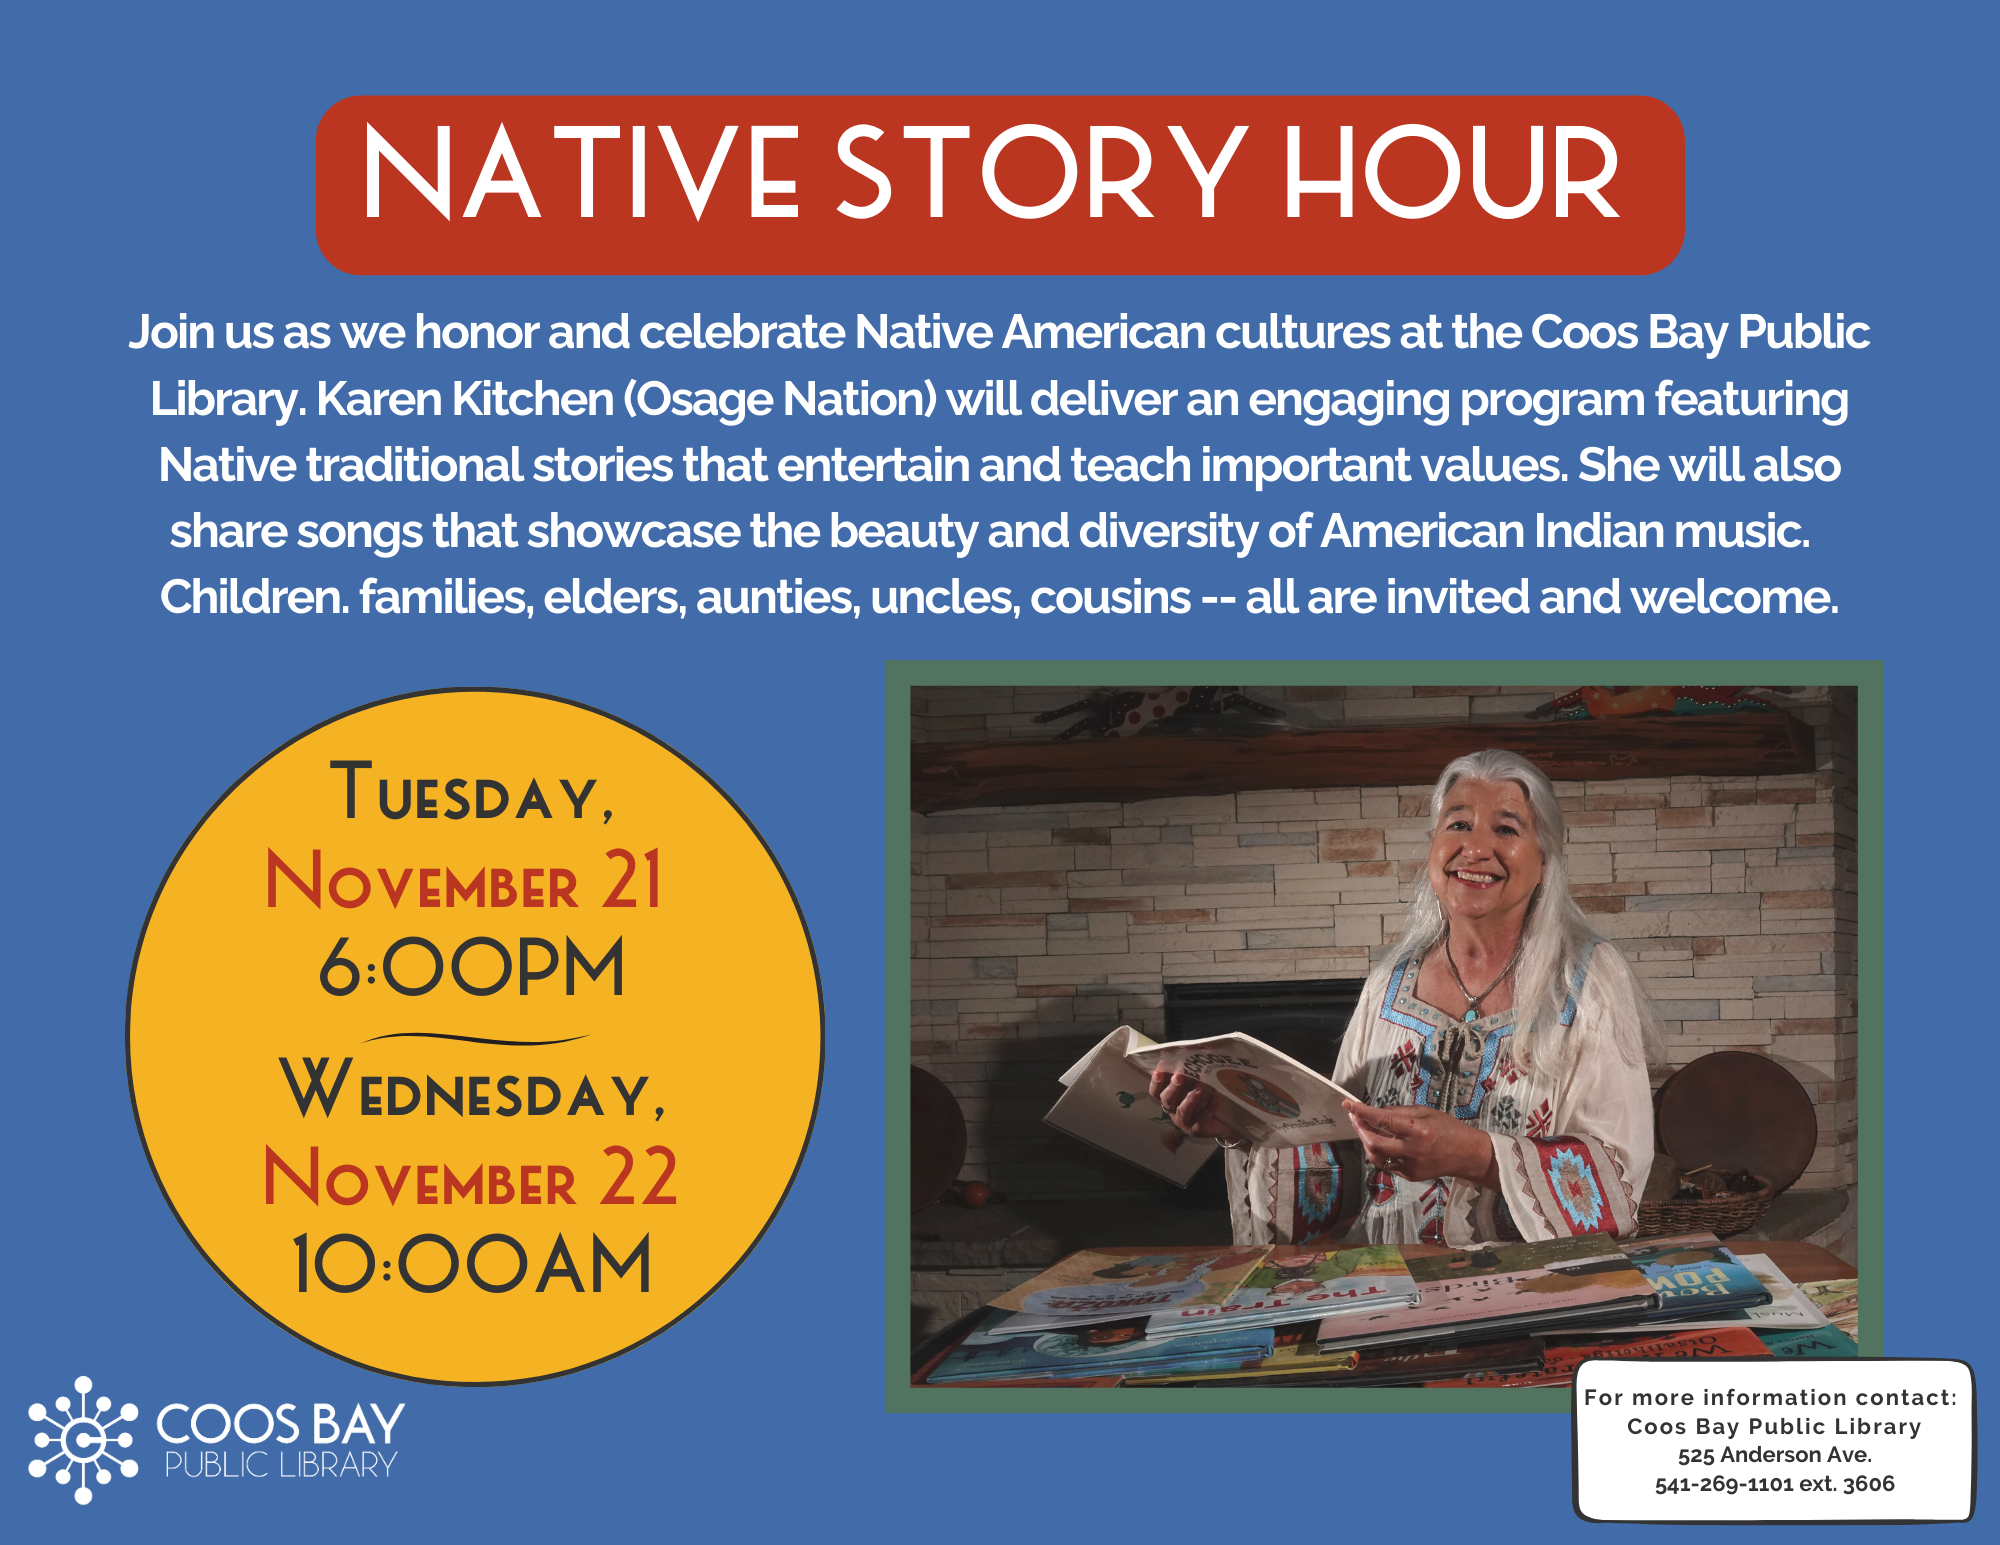 Native Story Hour With Karen Kitchen